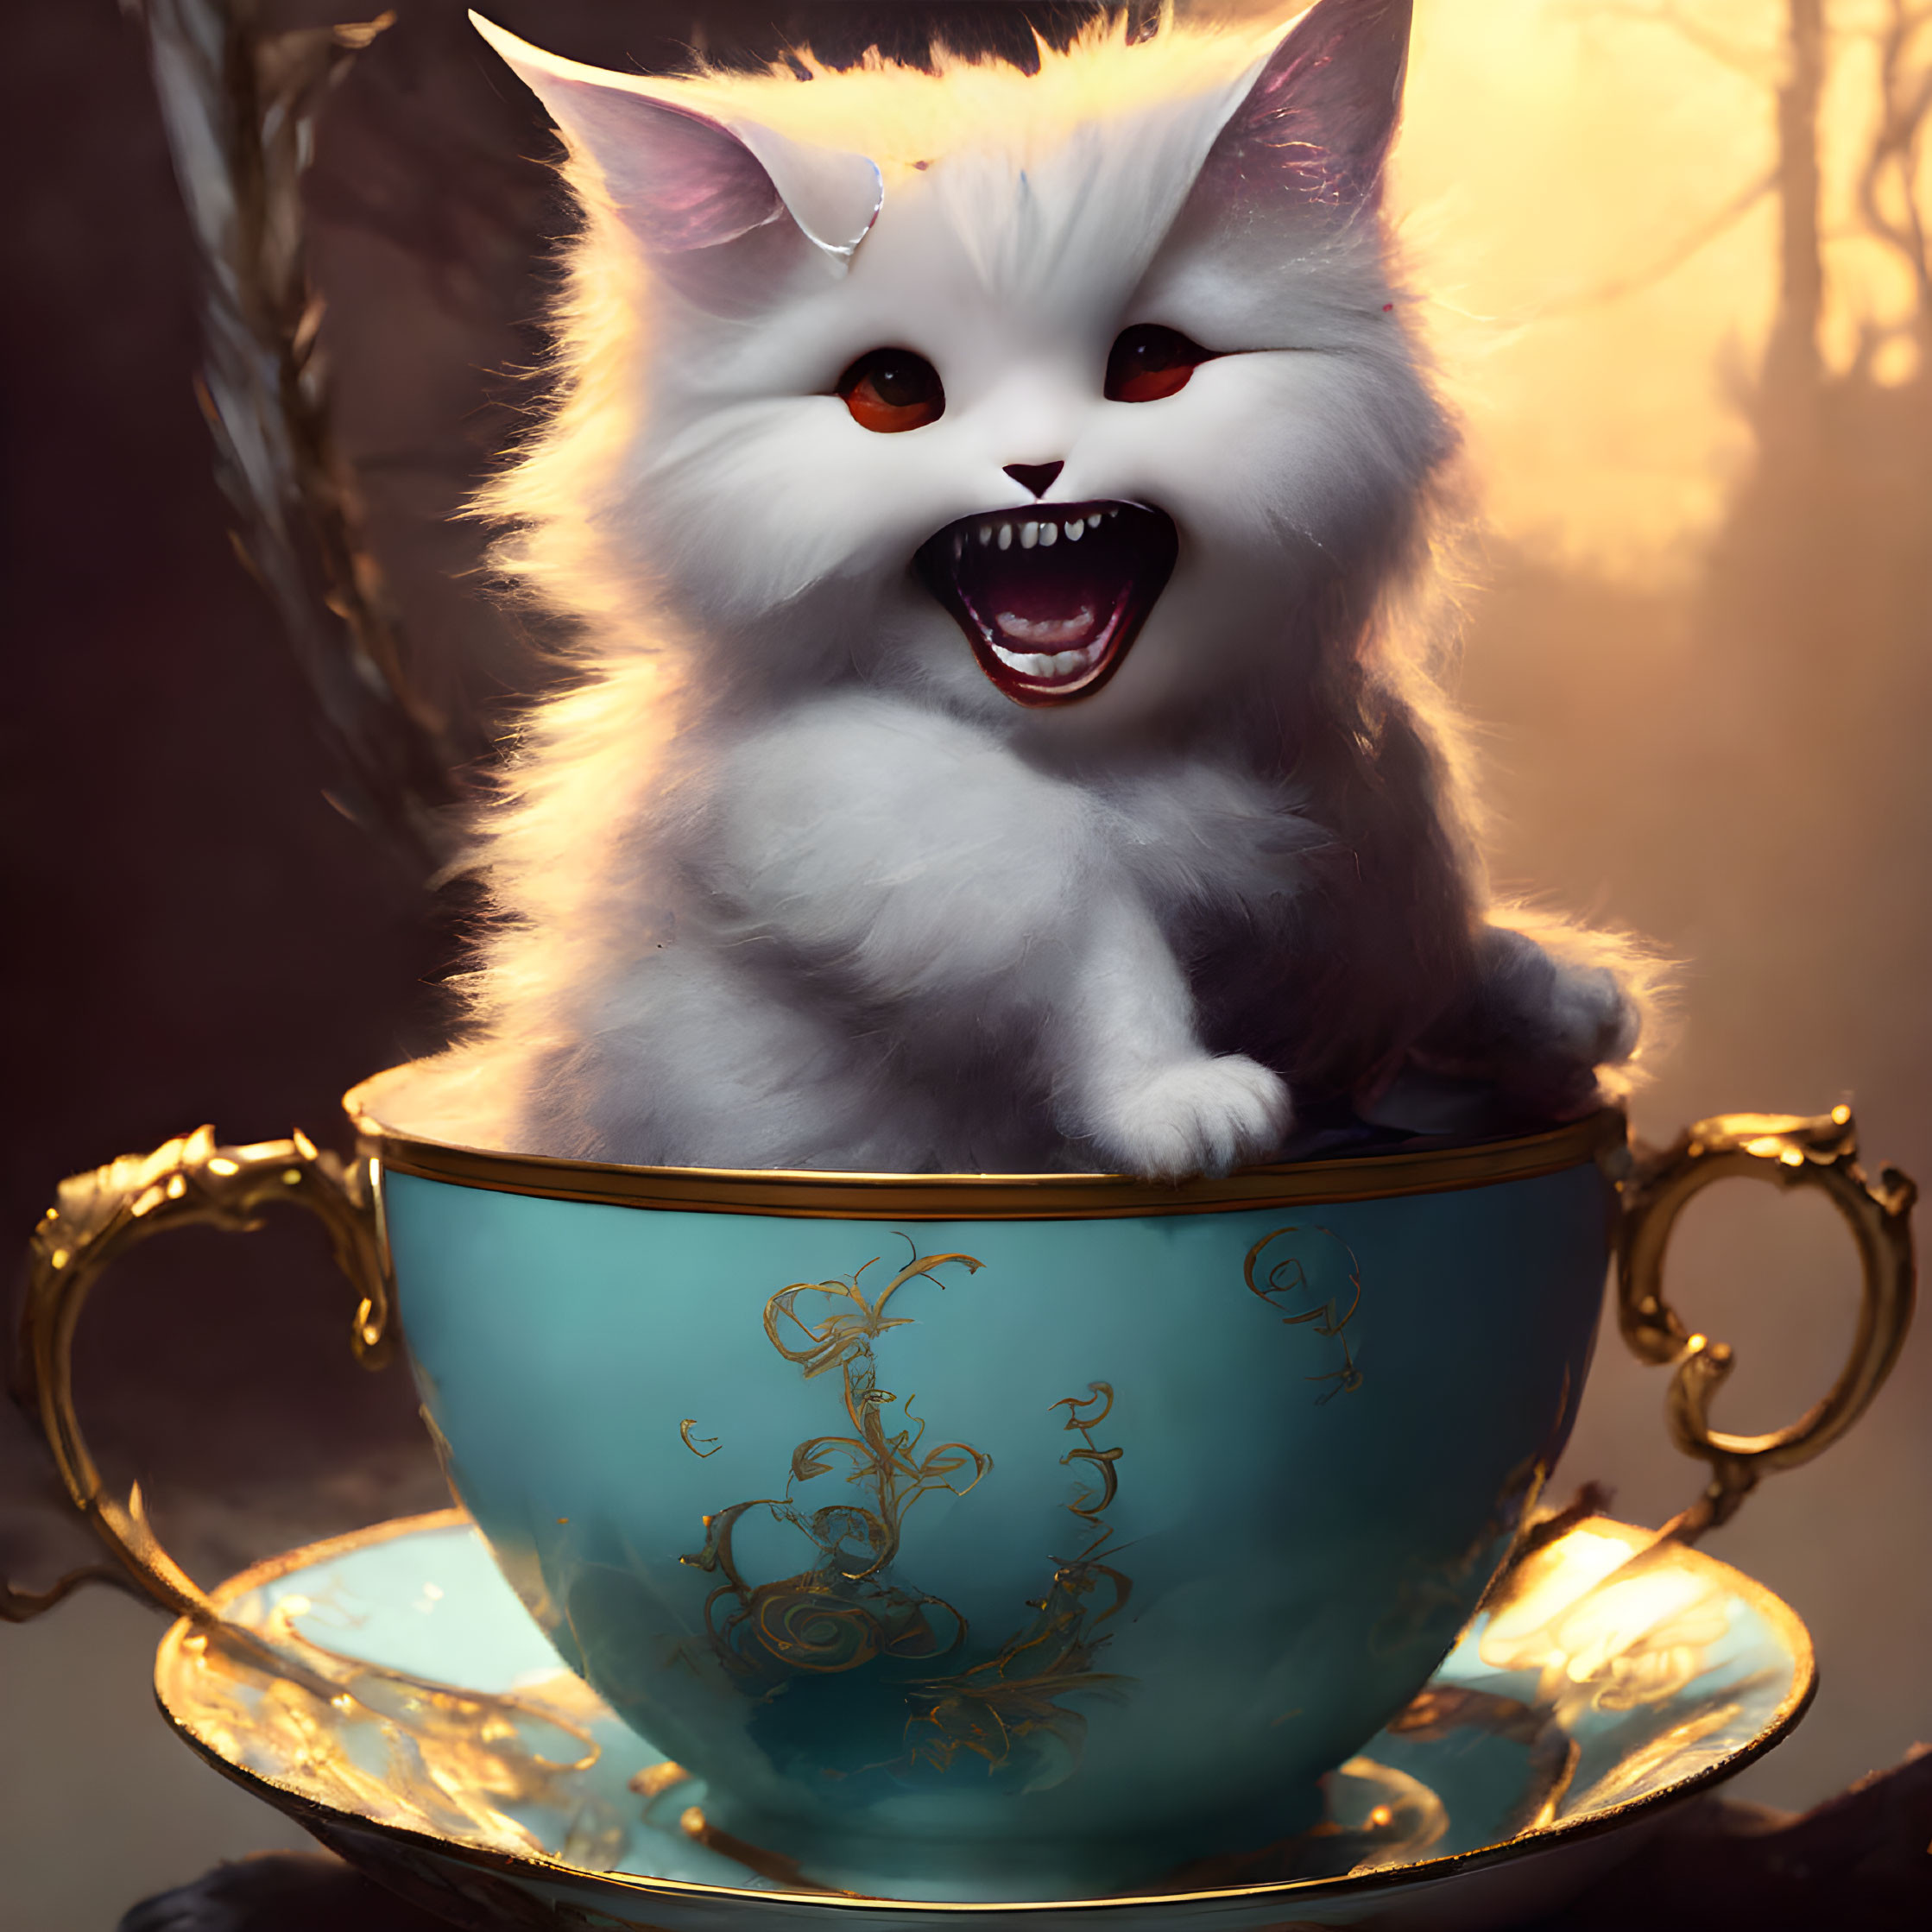 Fluffy kitten with large eyes in turquoise teacup